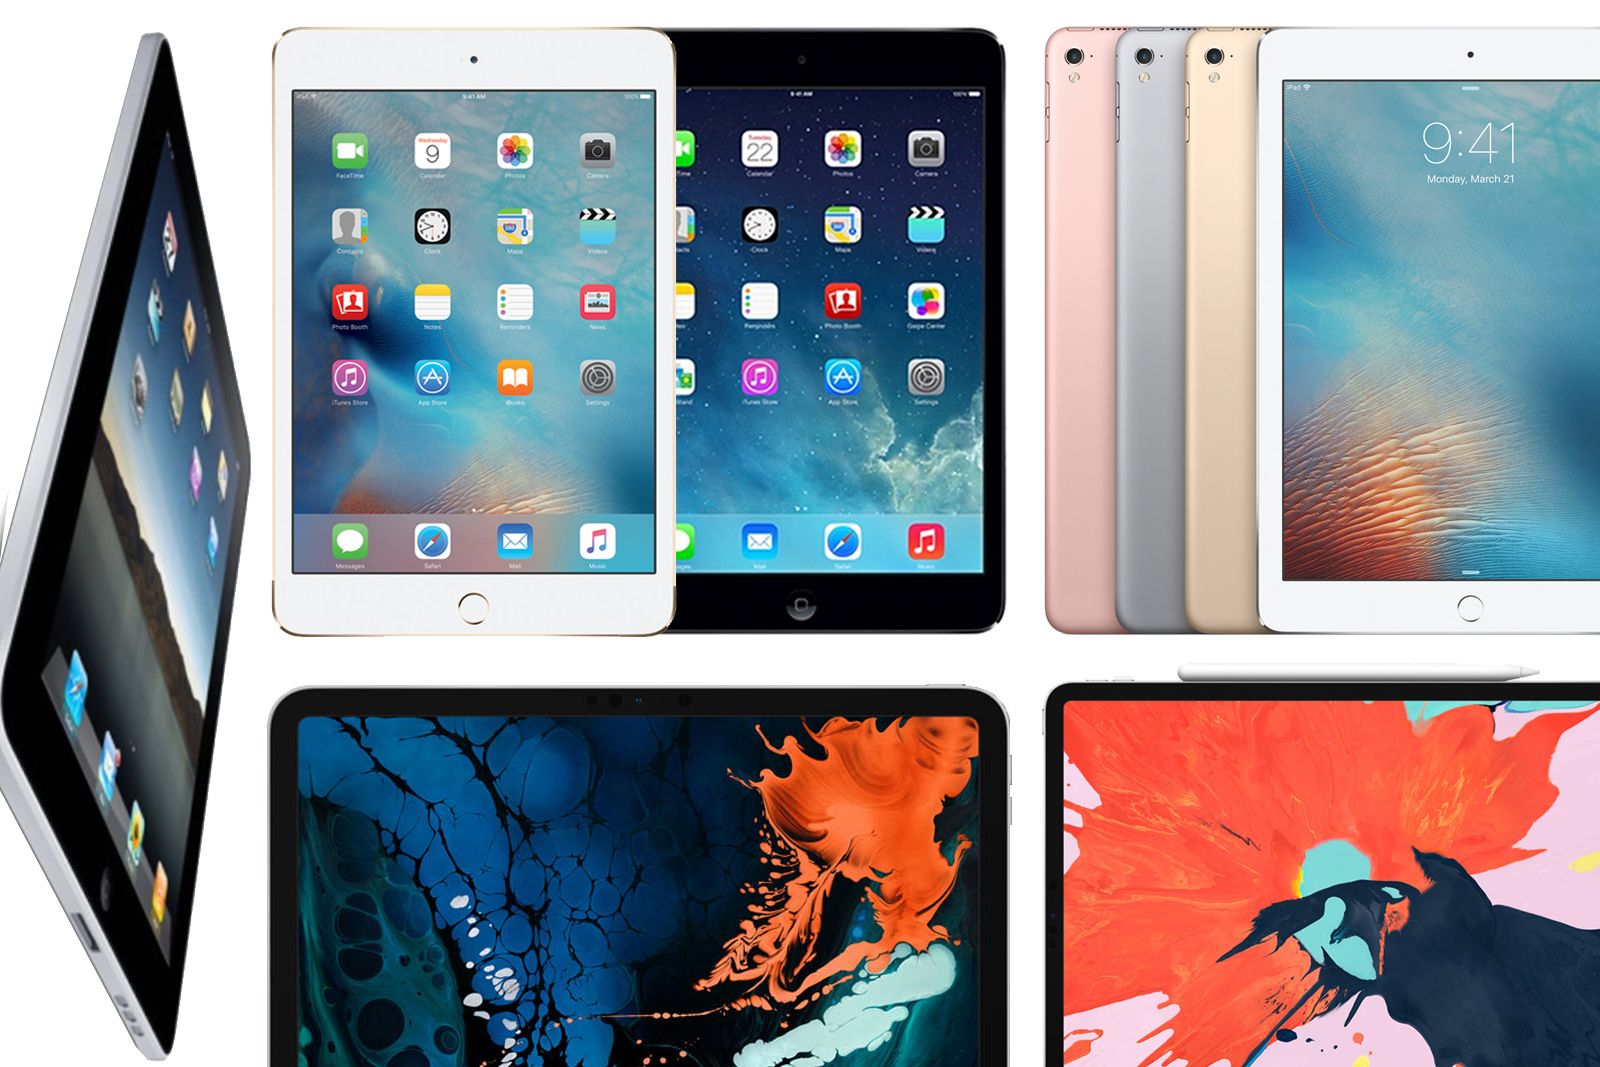 History Of The Apple Ipad The Timeline Of Apples Tablet From Then To Now image 1